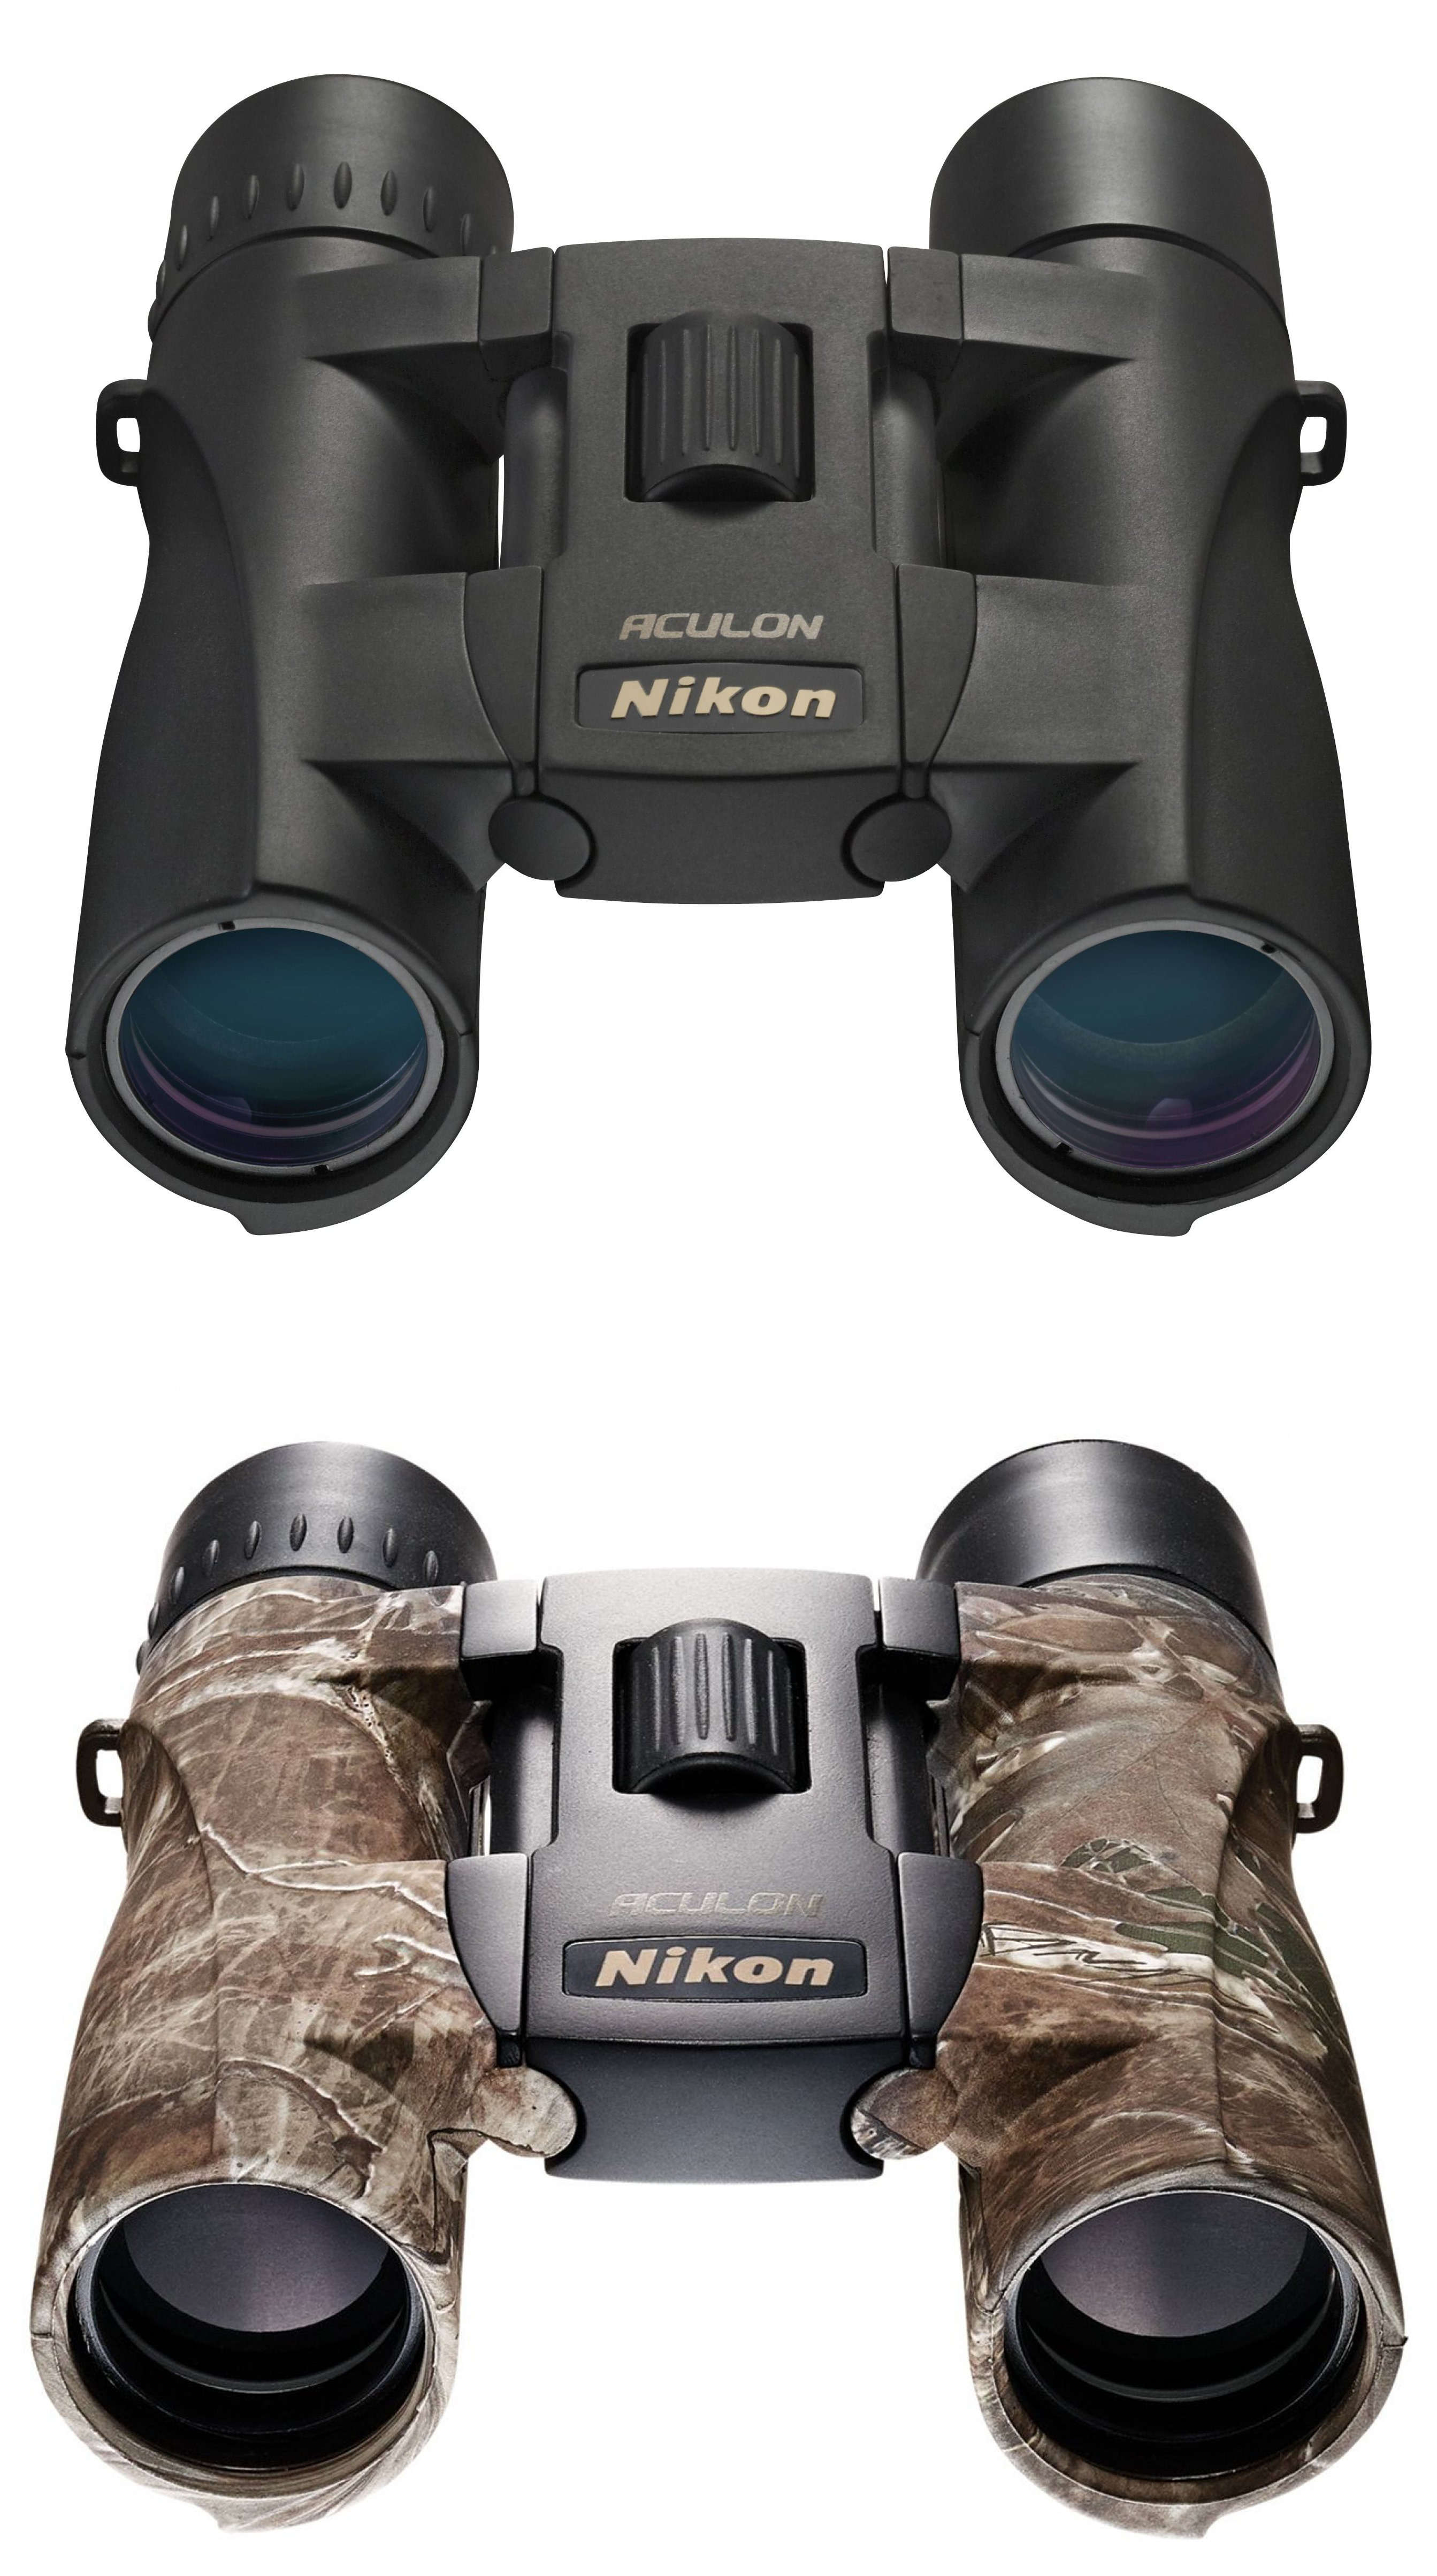 26% 10x25mm 4.4 w/ Handling Off Star Roof Aculon Shipping Binoculars Nikon and Prism | Free Up A30 Rating to